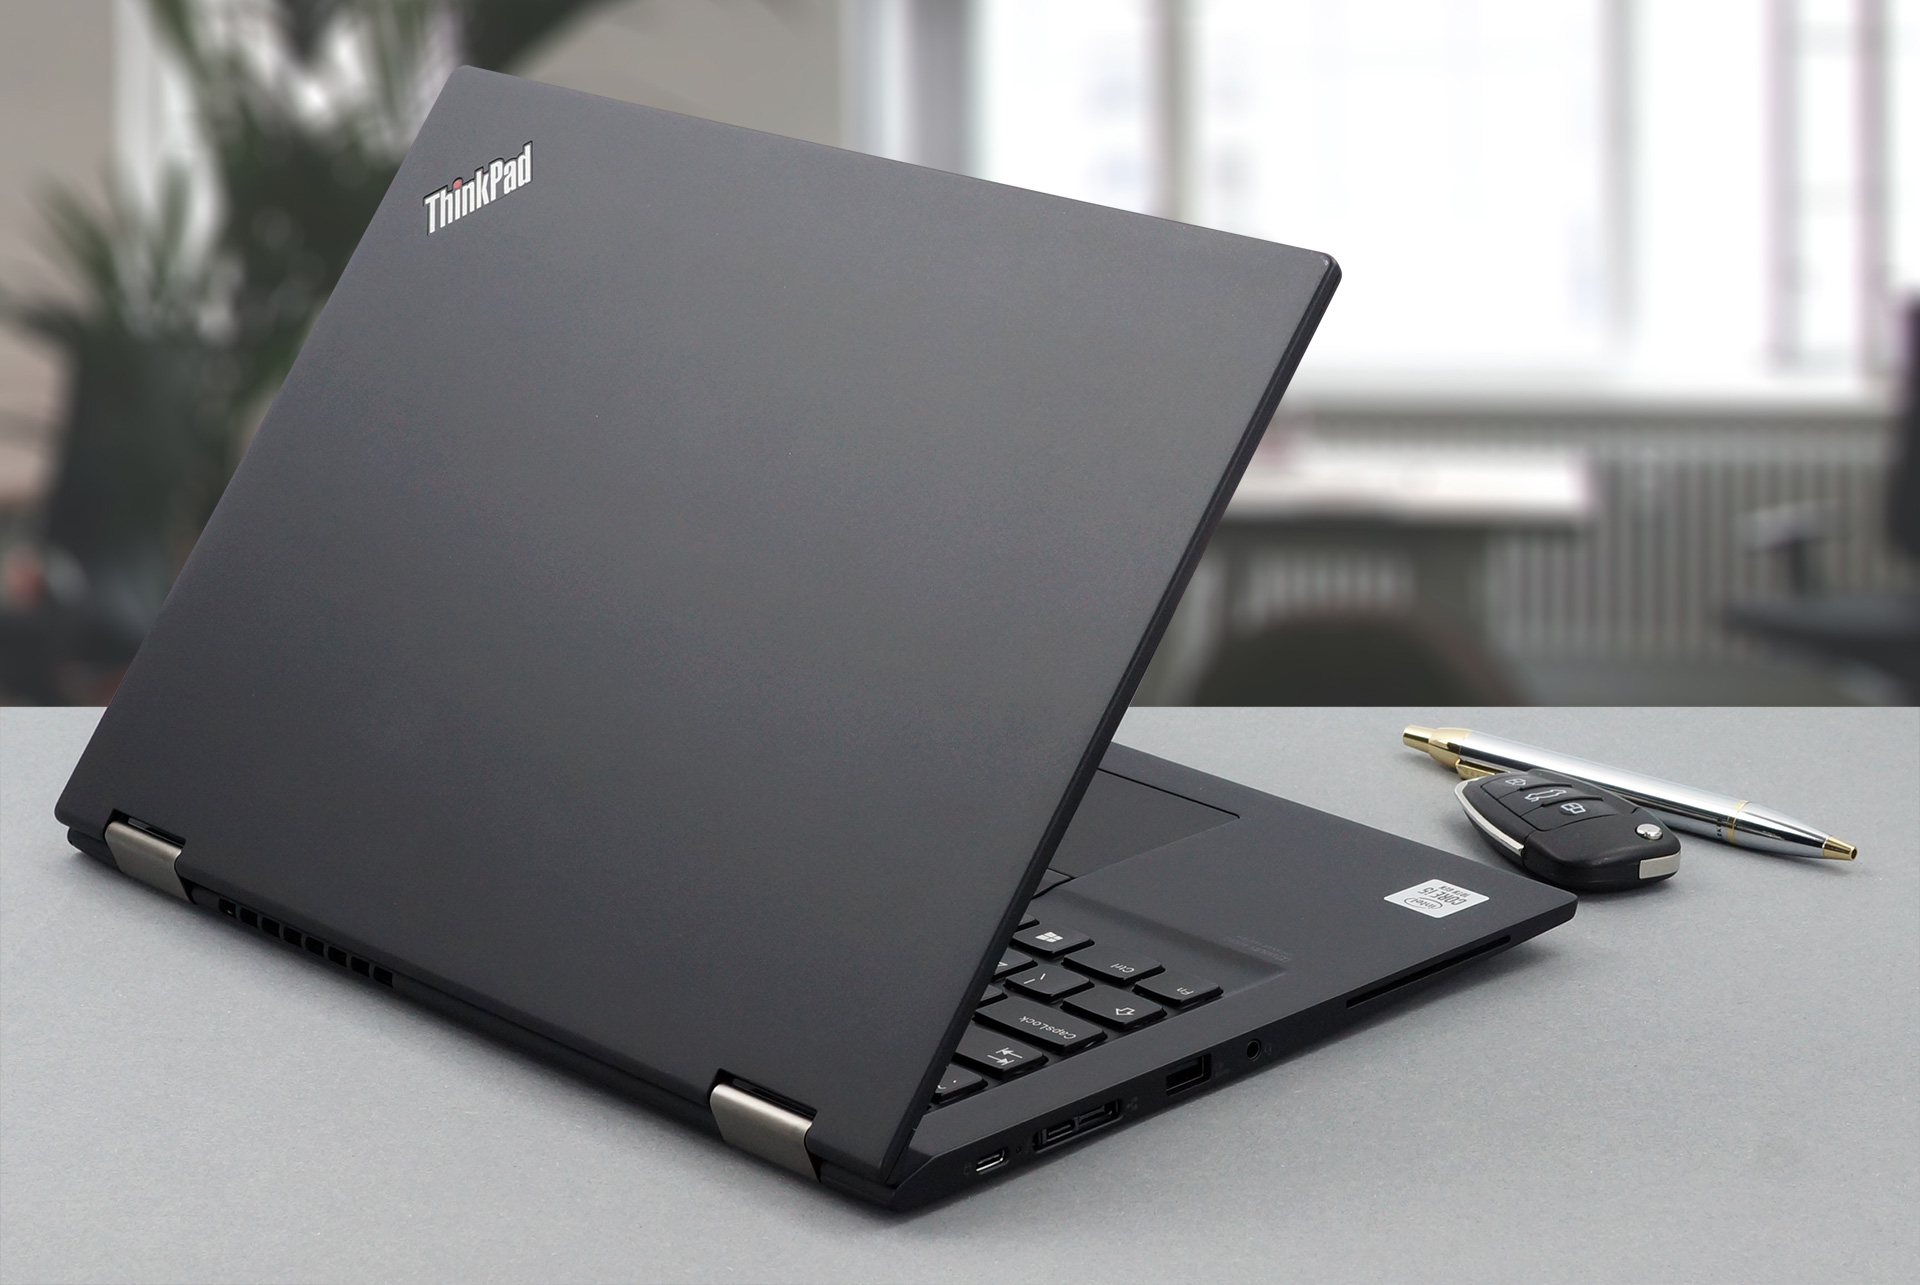 Lenovo ThinkPad X13 Yoga review - a business laptop with accurate